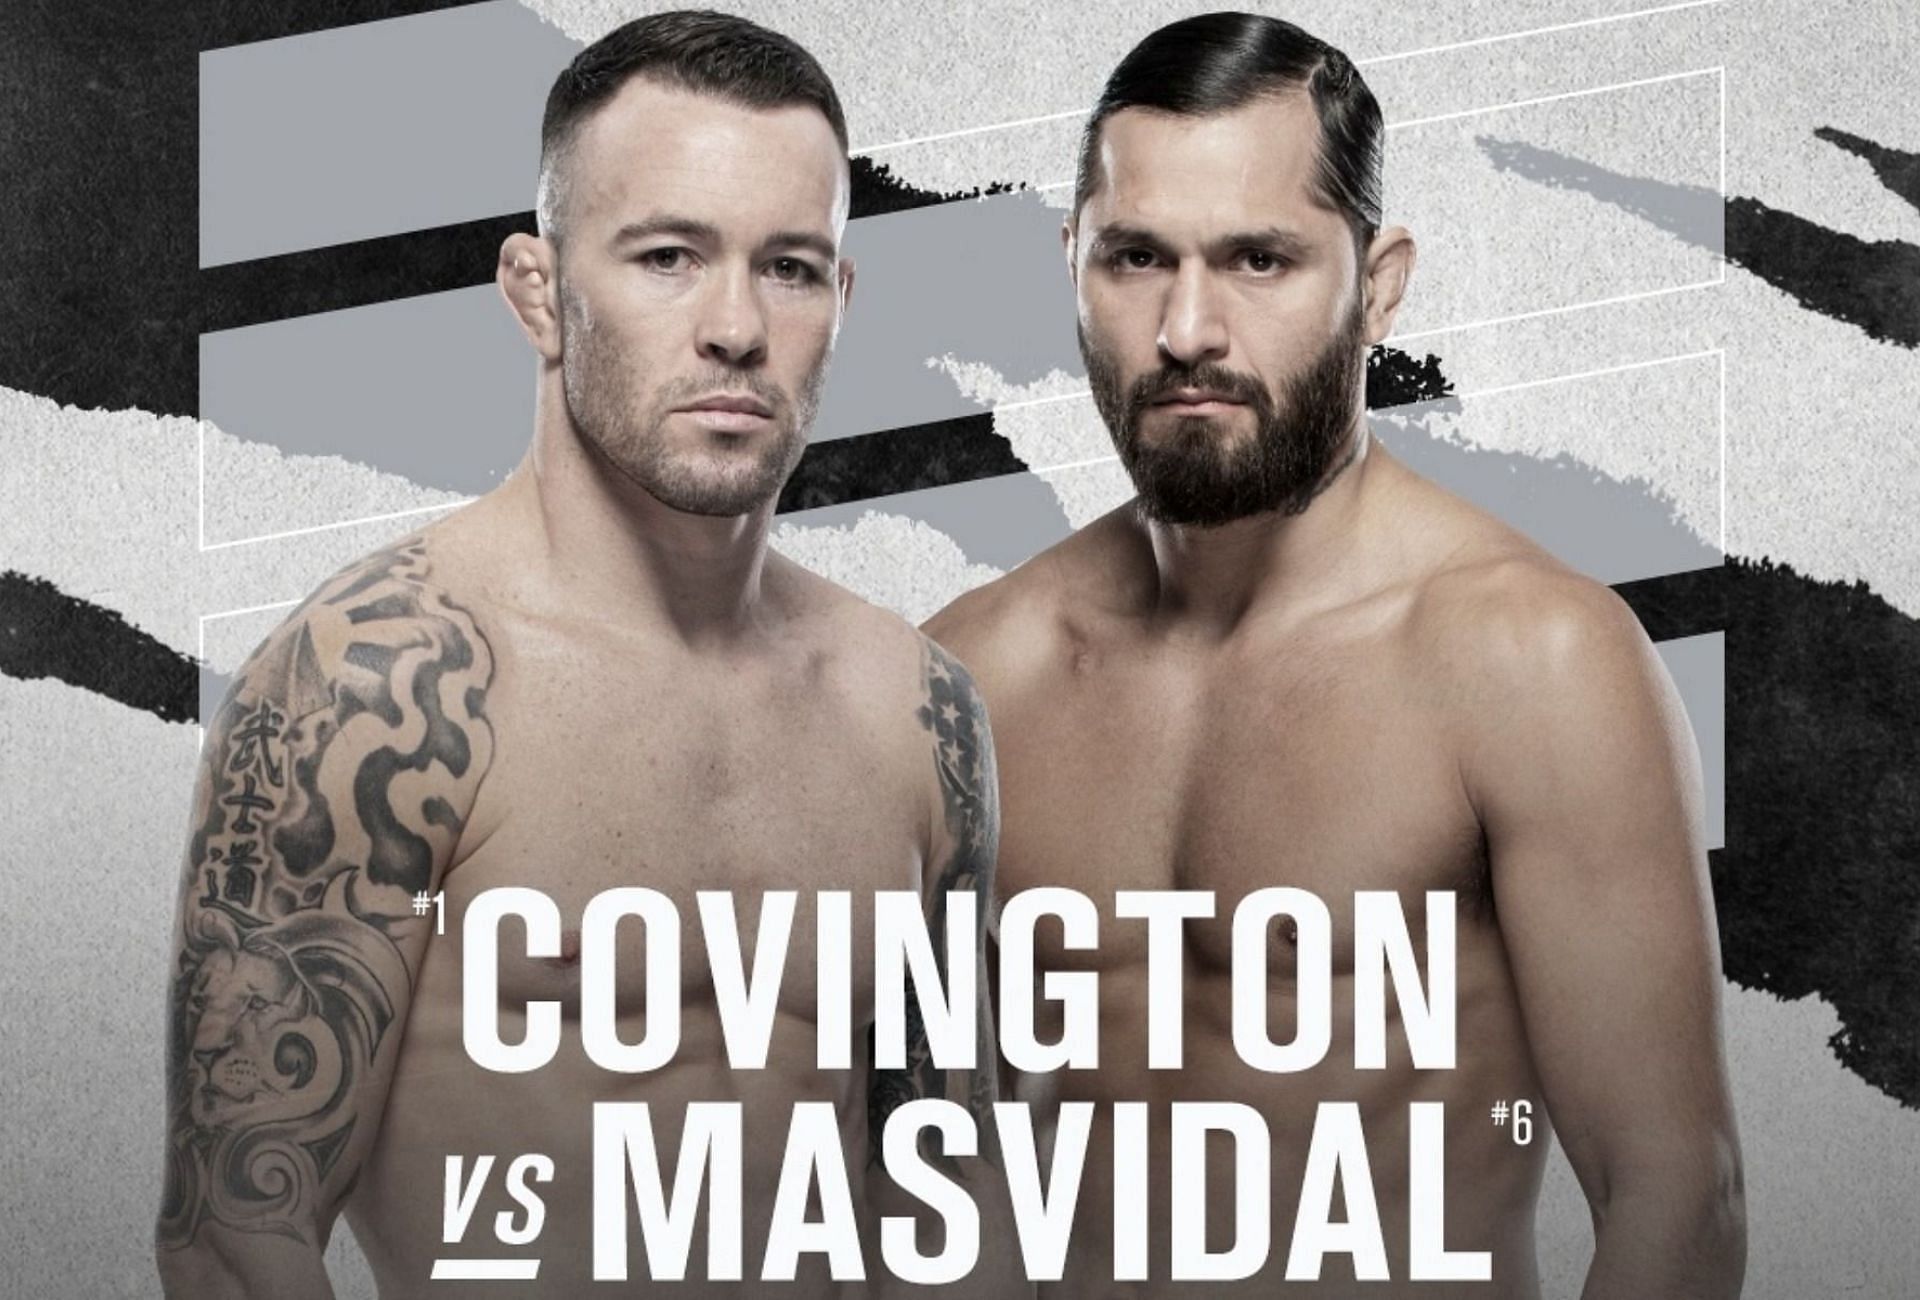 Colby Covington (left) and Jorge Masvidal (right) PC: UFC on Instagram